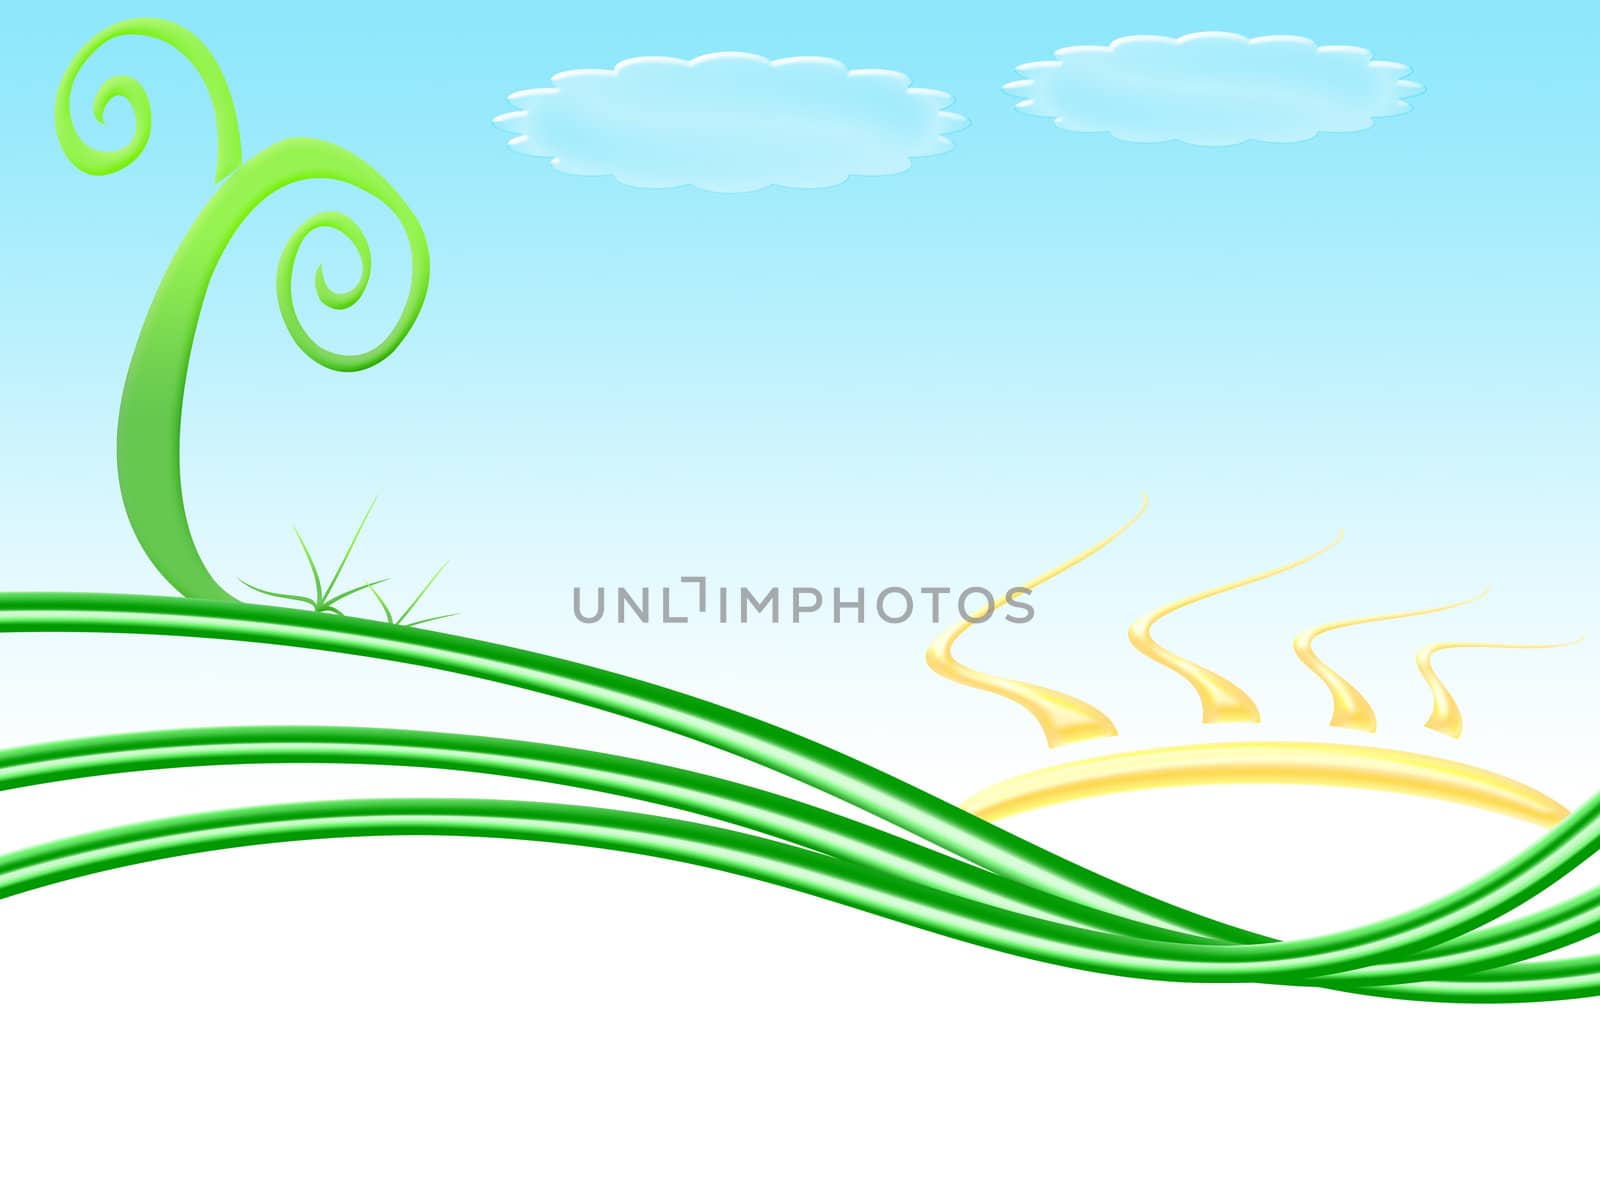 ecology cover. blank space for text, trademark or slogan. Ideal for business card, letterhead or brochure cover
